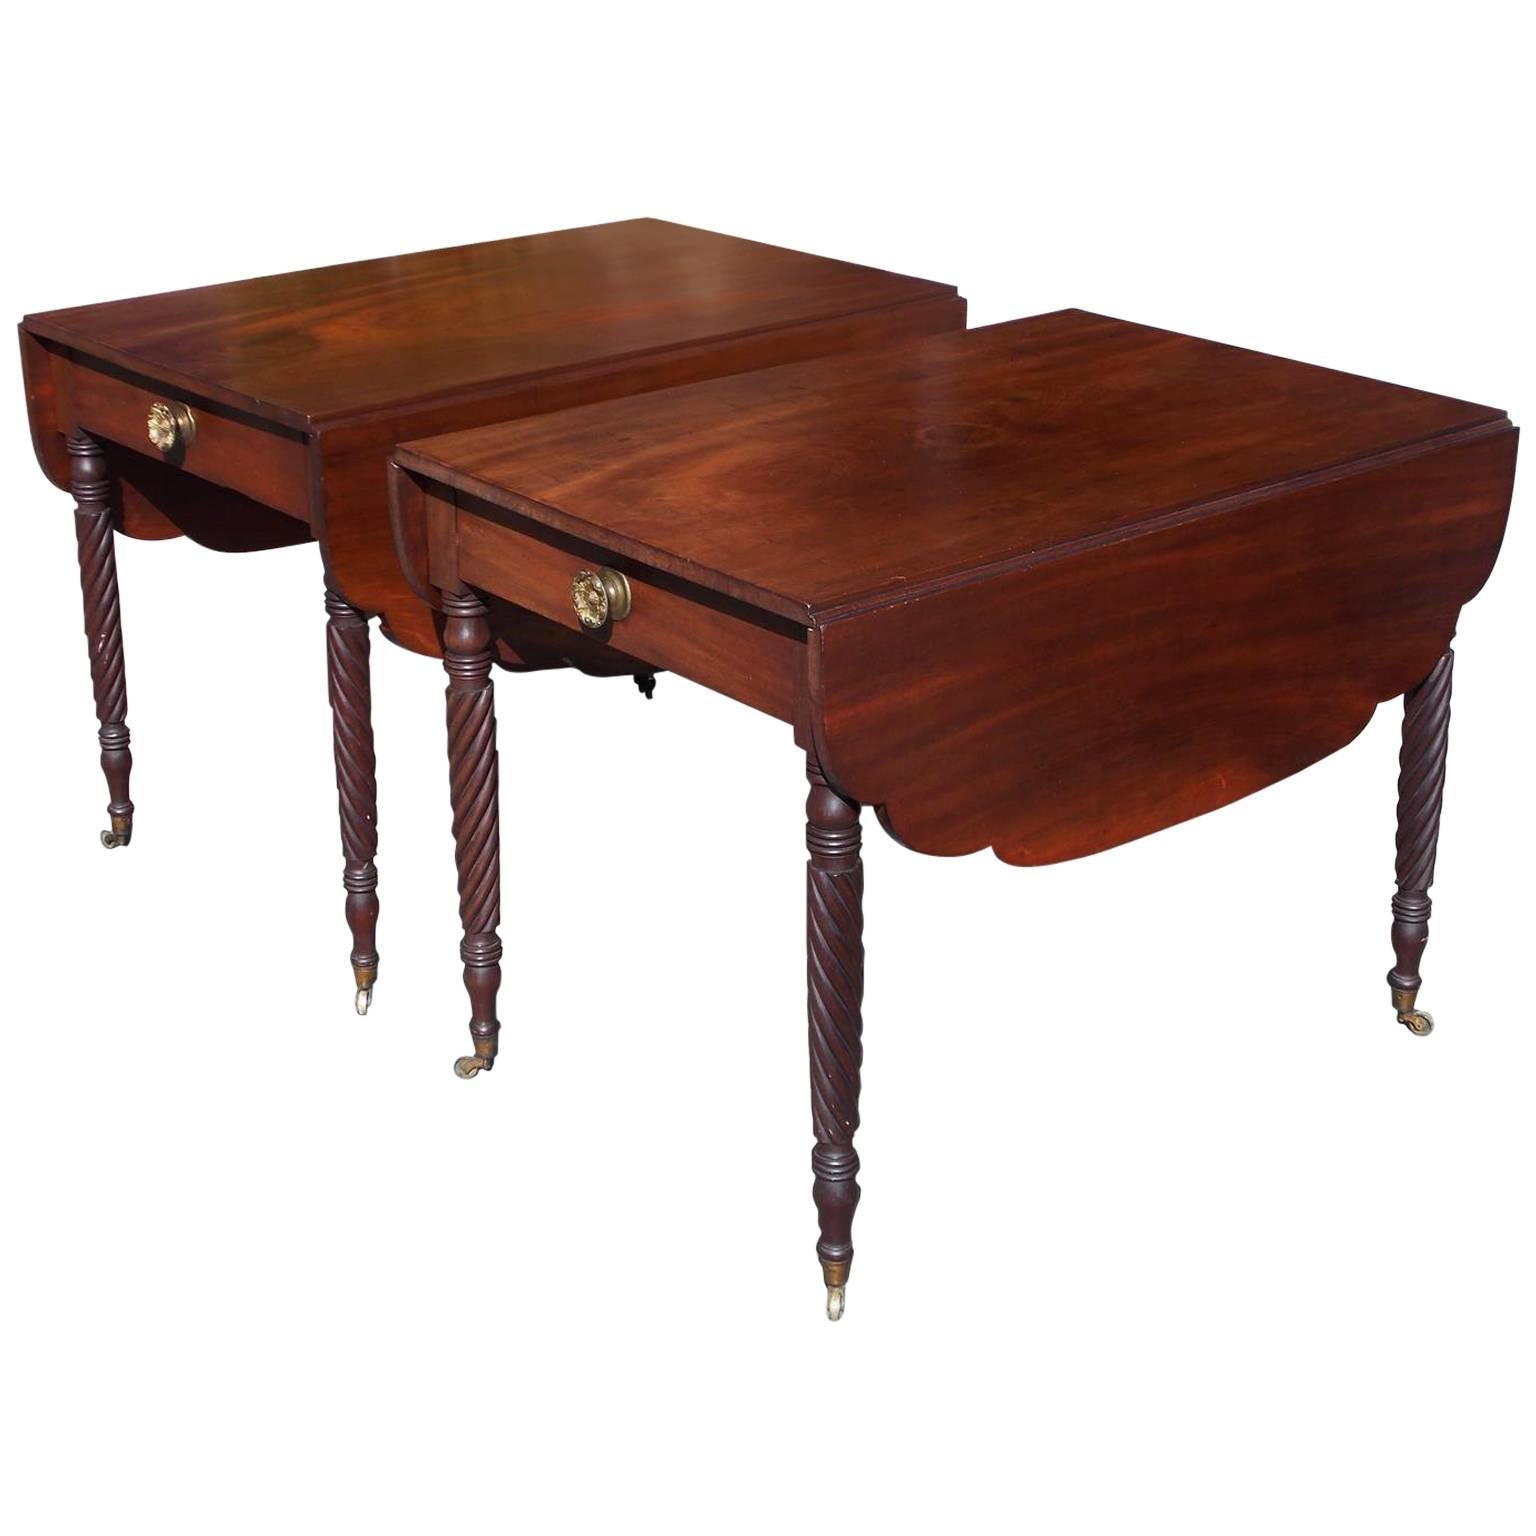 Pair of American Sheraton mahogany one-drawer drop-leaf Pembroke tables with carved scalloped leaves, original floral brasses, and terminating on turned ringed barley twist legs with the original brass casters. Baltimore, Early 19th century.